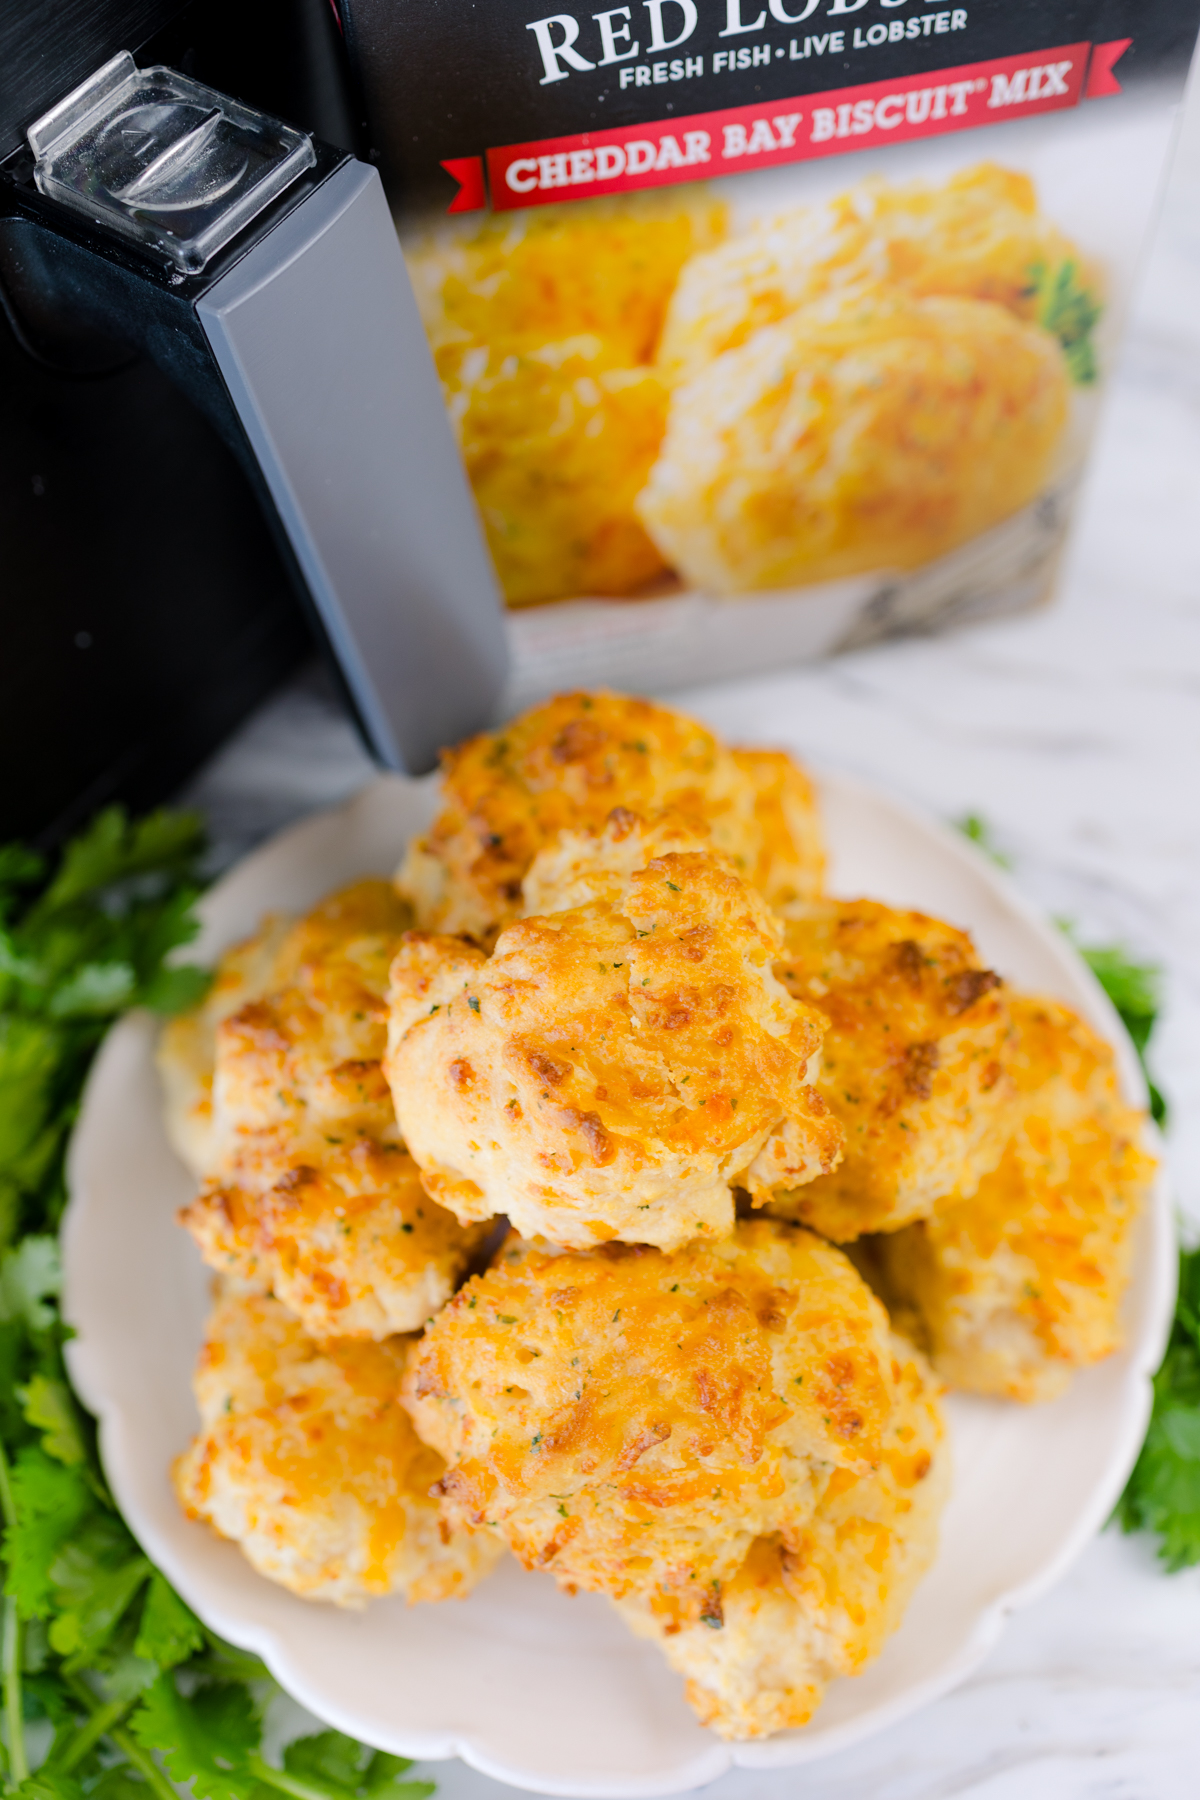 Red Lobster Biscuits in a pile on a white plate next to an air fryer and a box mix.